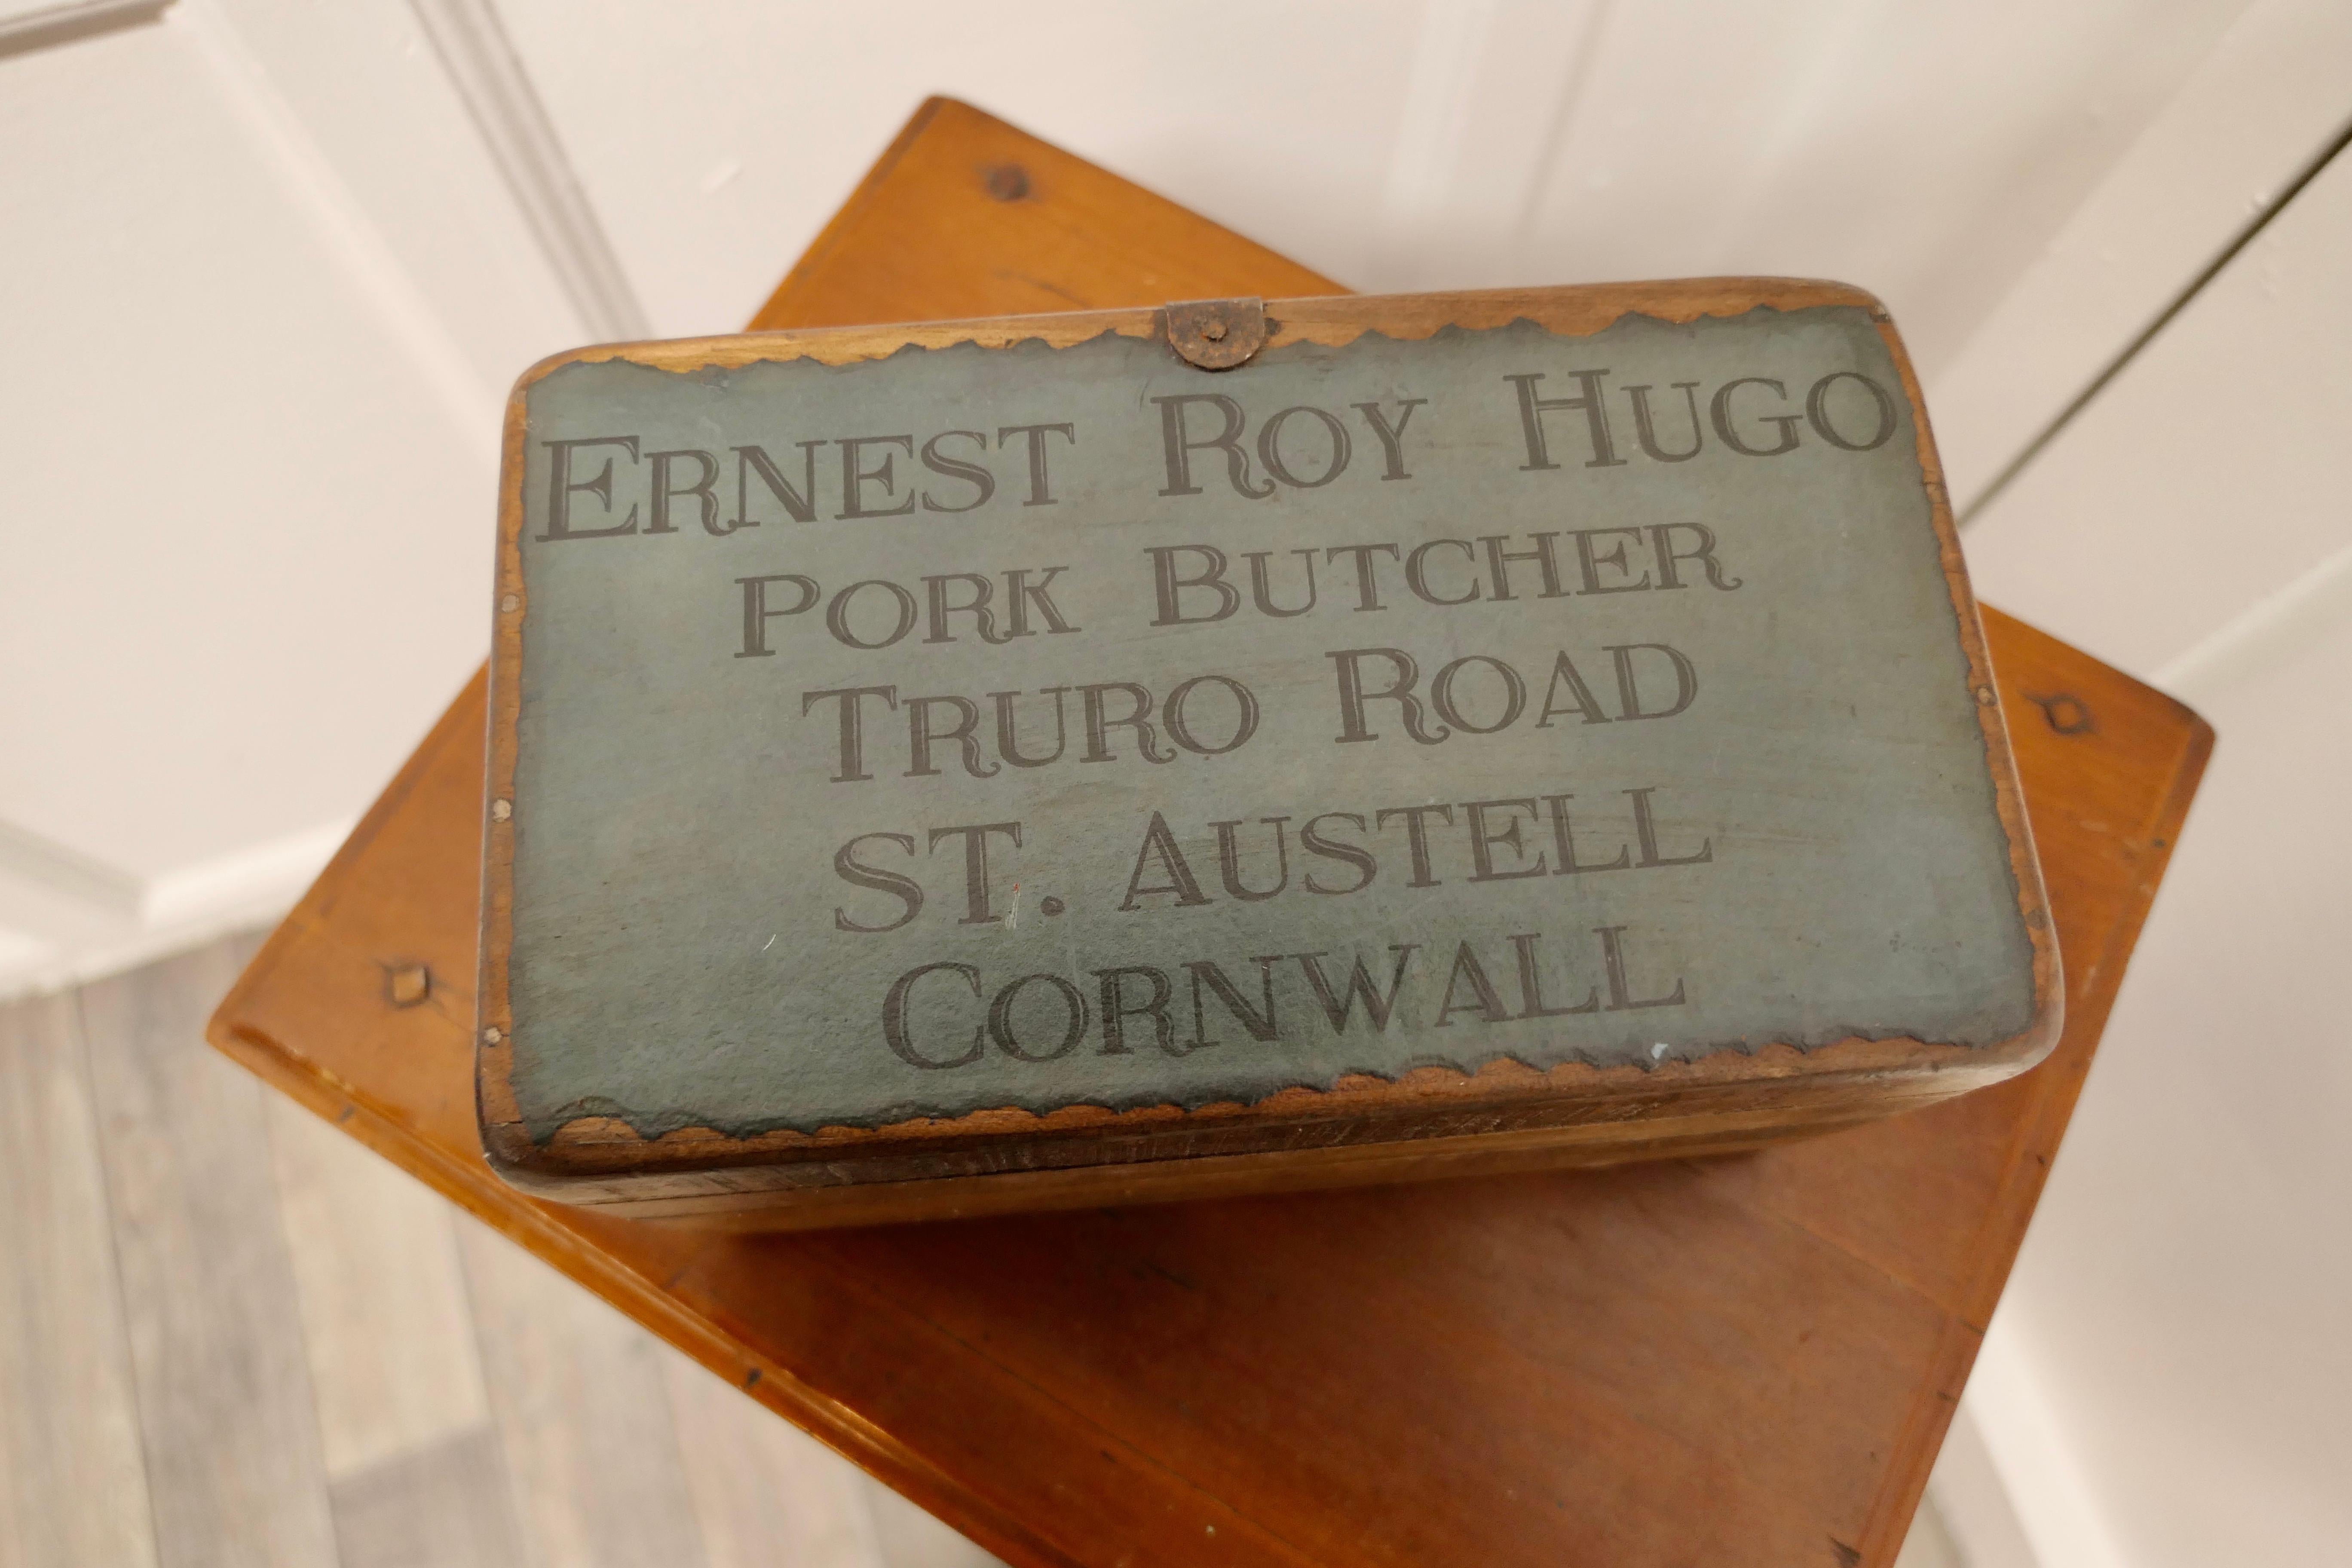 Decorative re painted 19th century wine box, trug.

A delightful piece painted over, advertising Roy Hugo Butcher.
The Carrier is made in pine and painted in a Dark Blue/Green and divided in 2
A great piece of attractive kitchenalia 
The Box is